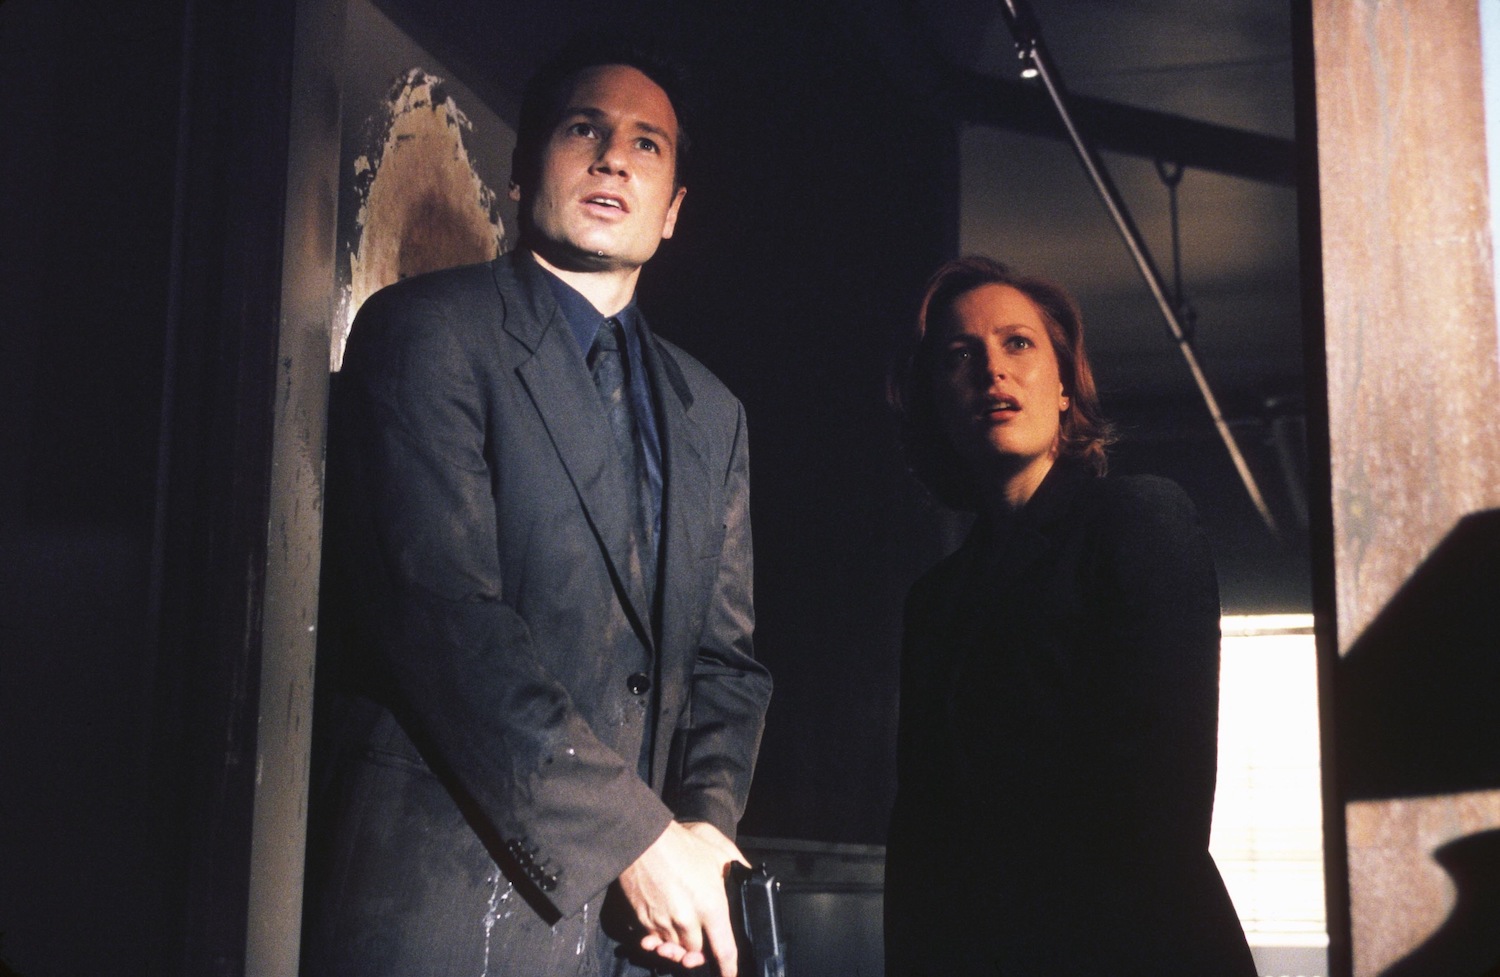 Agent Fox Mulder (David Duchovny) and Agent Dana Scully (Gillian Anderson) on 'The X-Files'